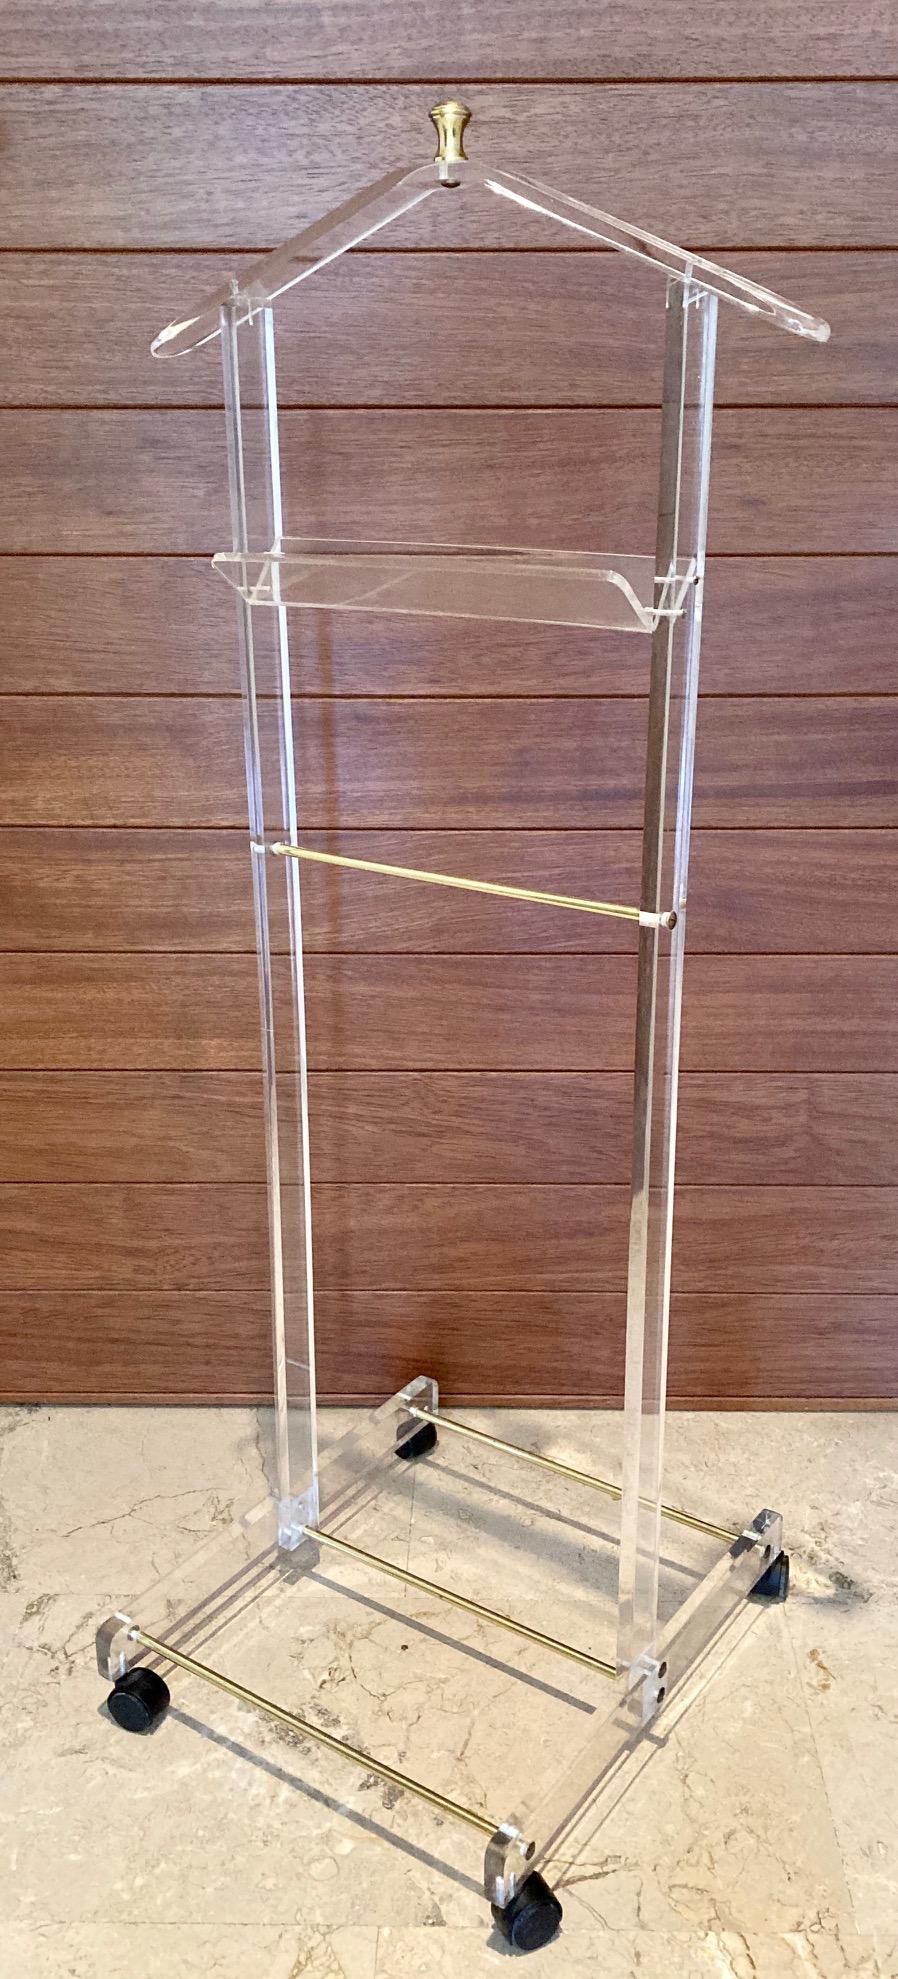 Mid-Century Modern Lucite valet stand Dressboy

The piece is in good condition with wear consistent with age and use.